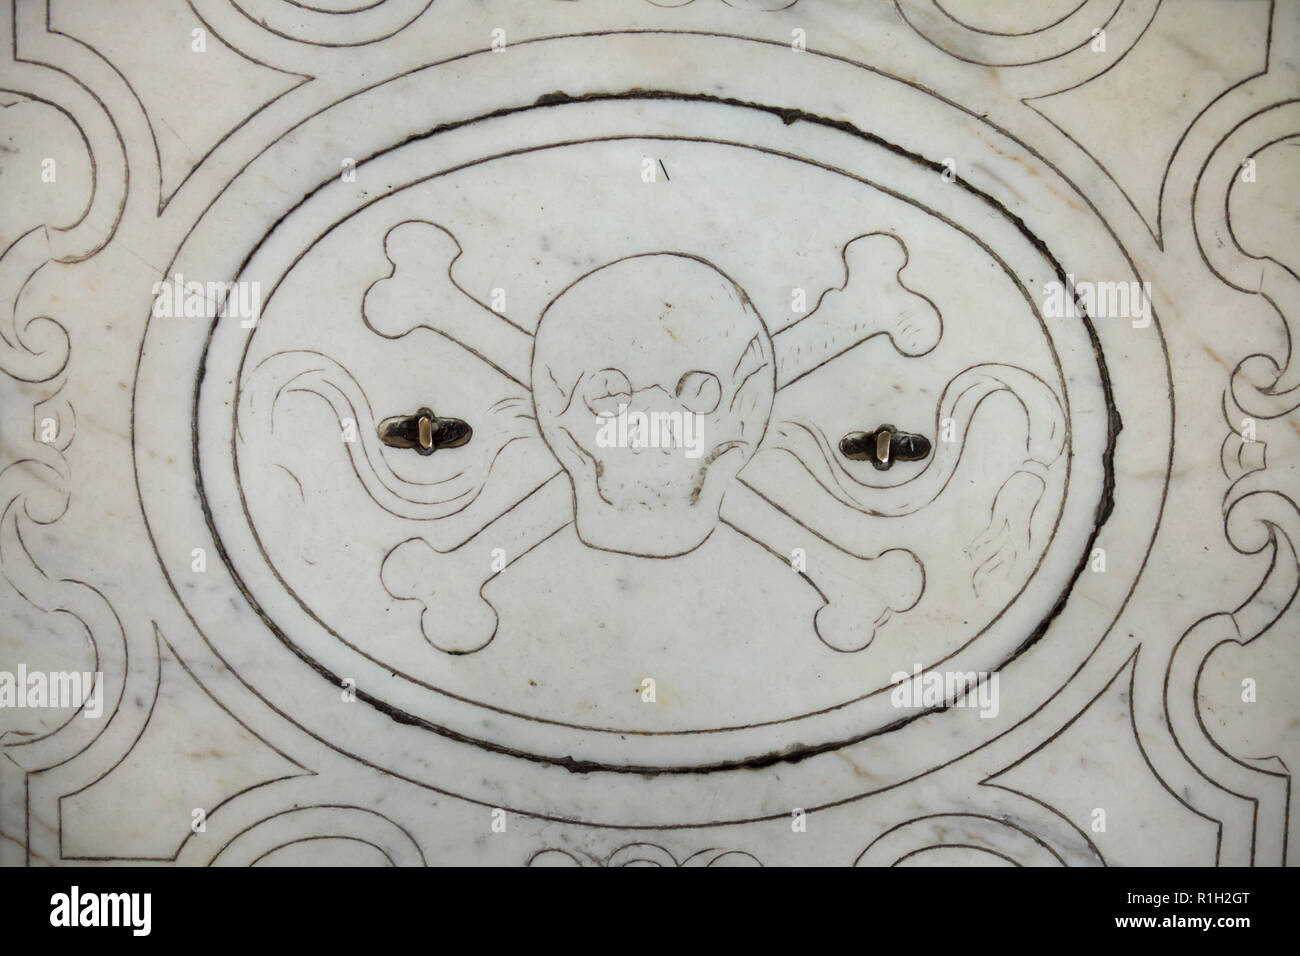 Skull and bones depicted on one of the tombstones in the Basilica di Santa Croce (Basilica of the Holy Cross) in Florence, Tuscany, Italy. Stock Photo